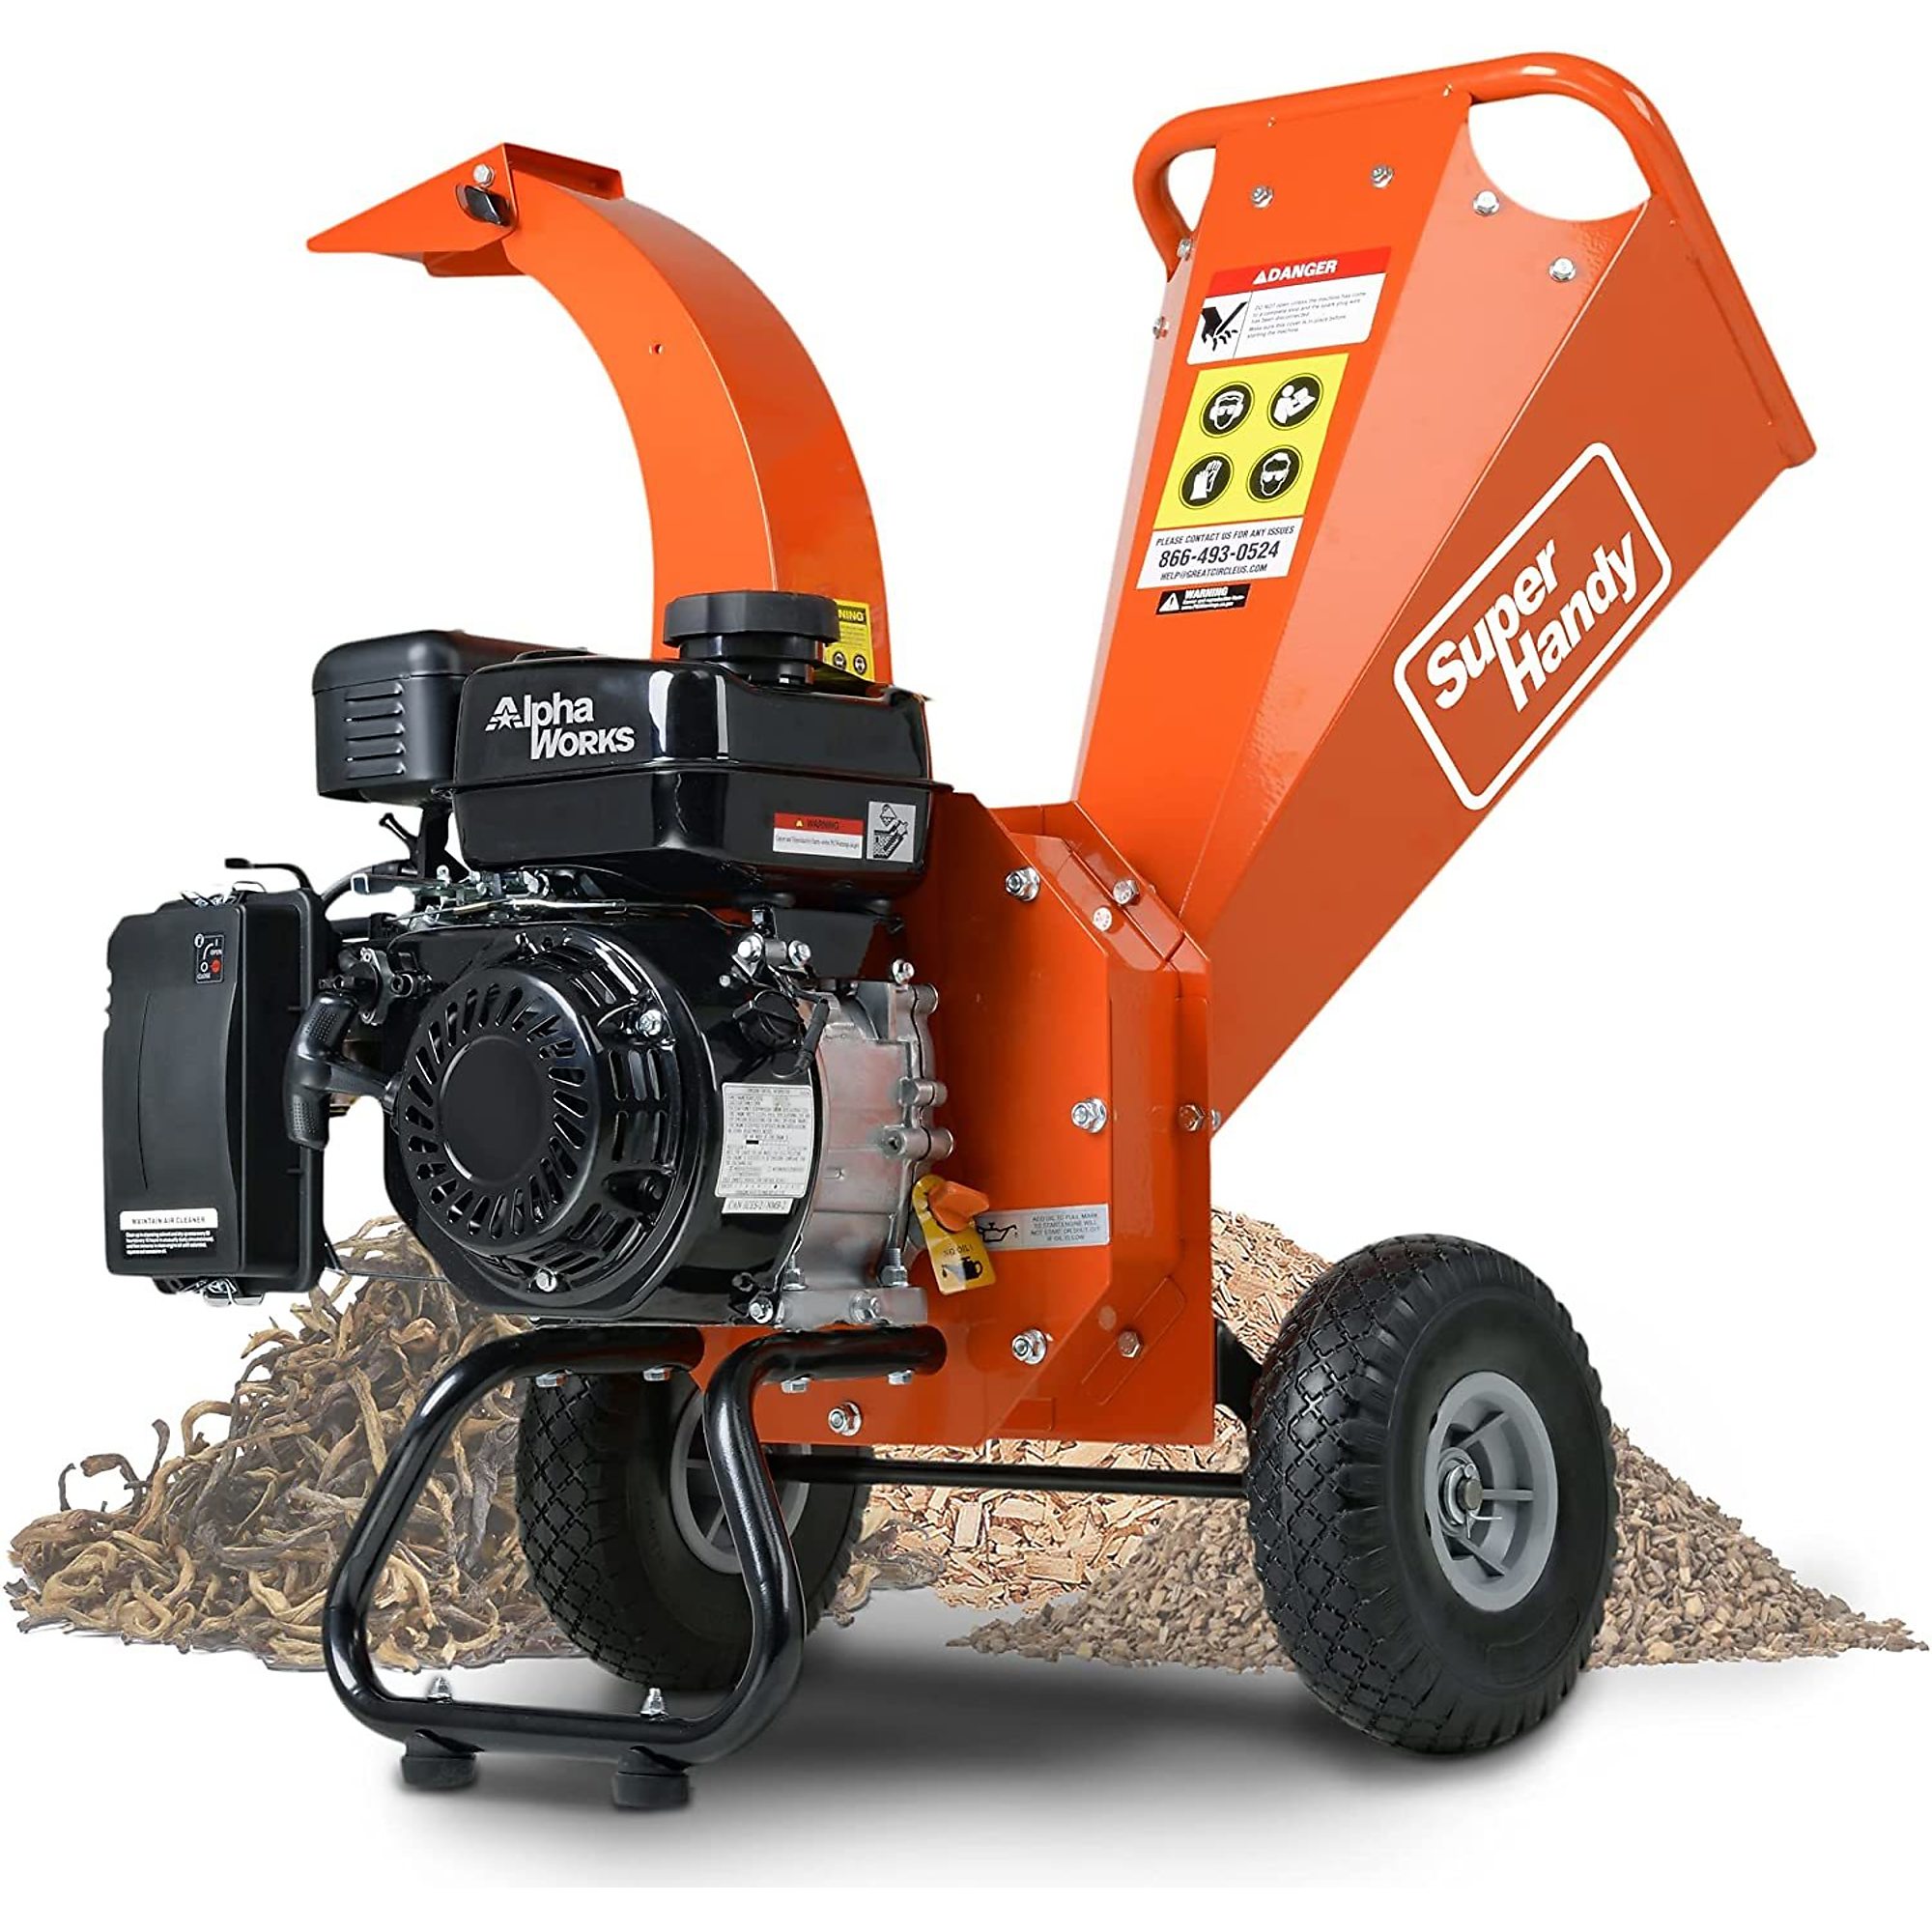 SuperHandy, Mini Wood Chipper, Engine Displacement 209 cc, Horsepower 7 Max. Cutting Thickness 3 in, Model TRI-GUO035